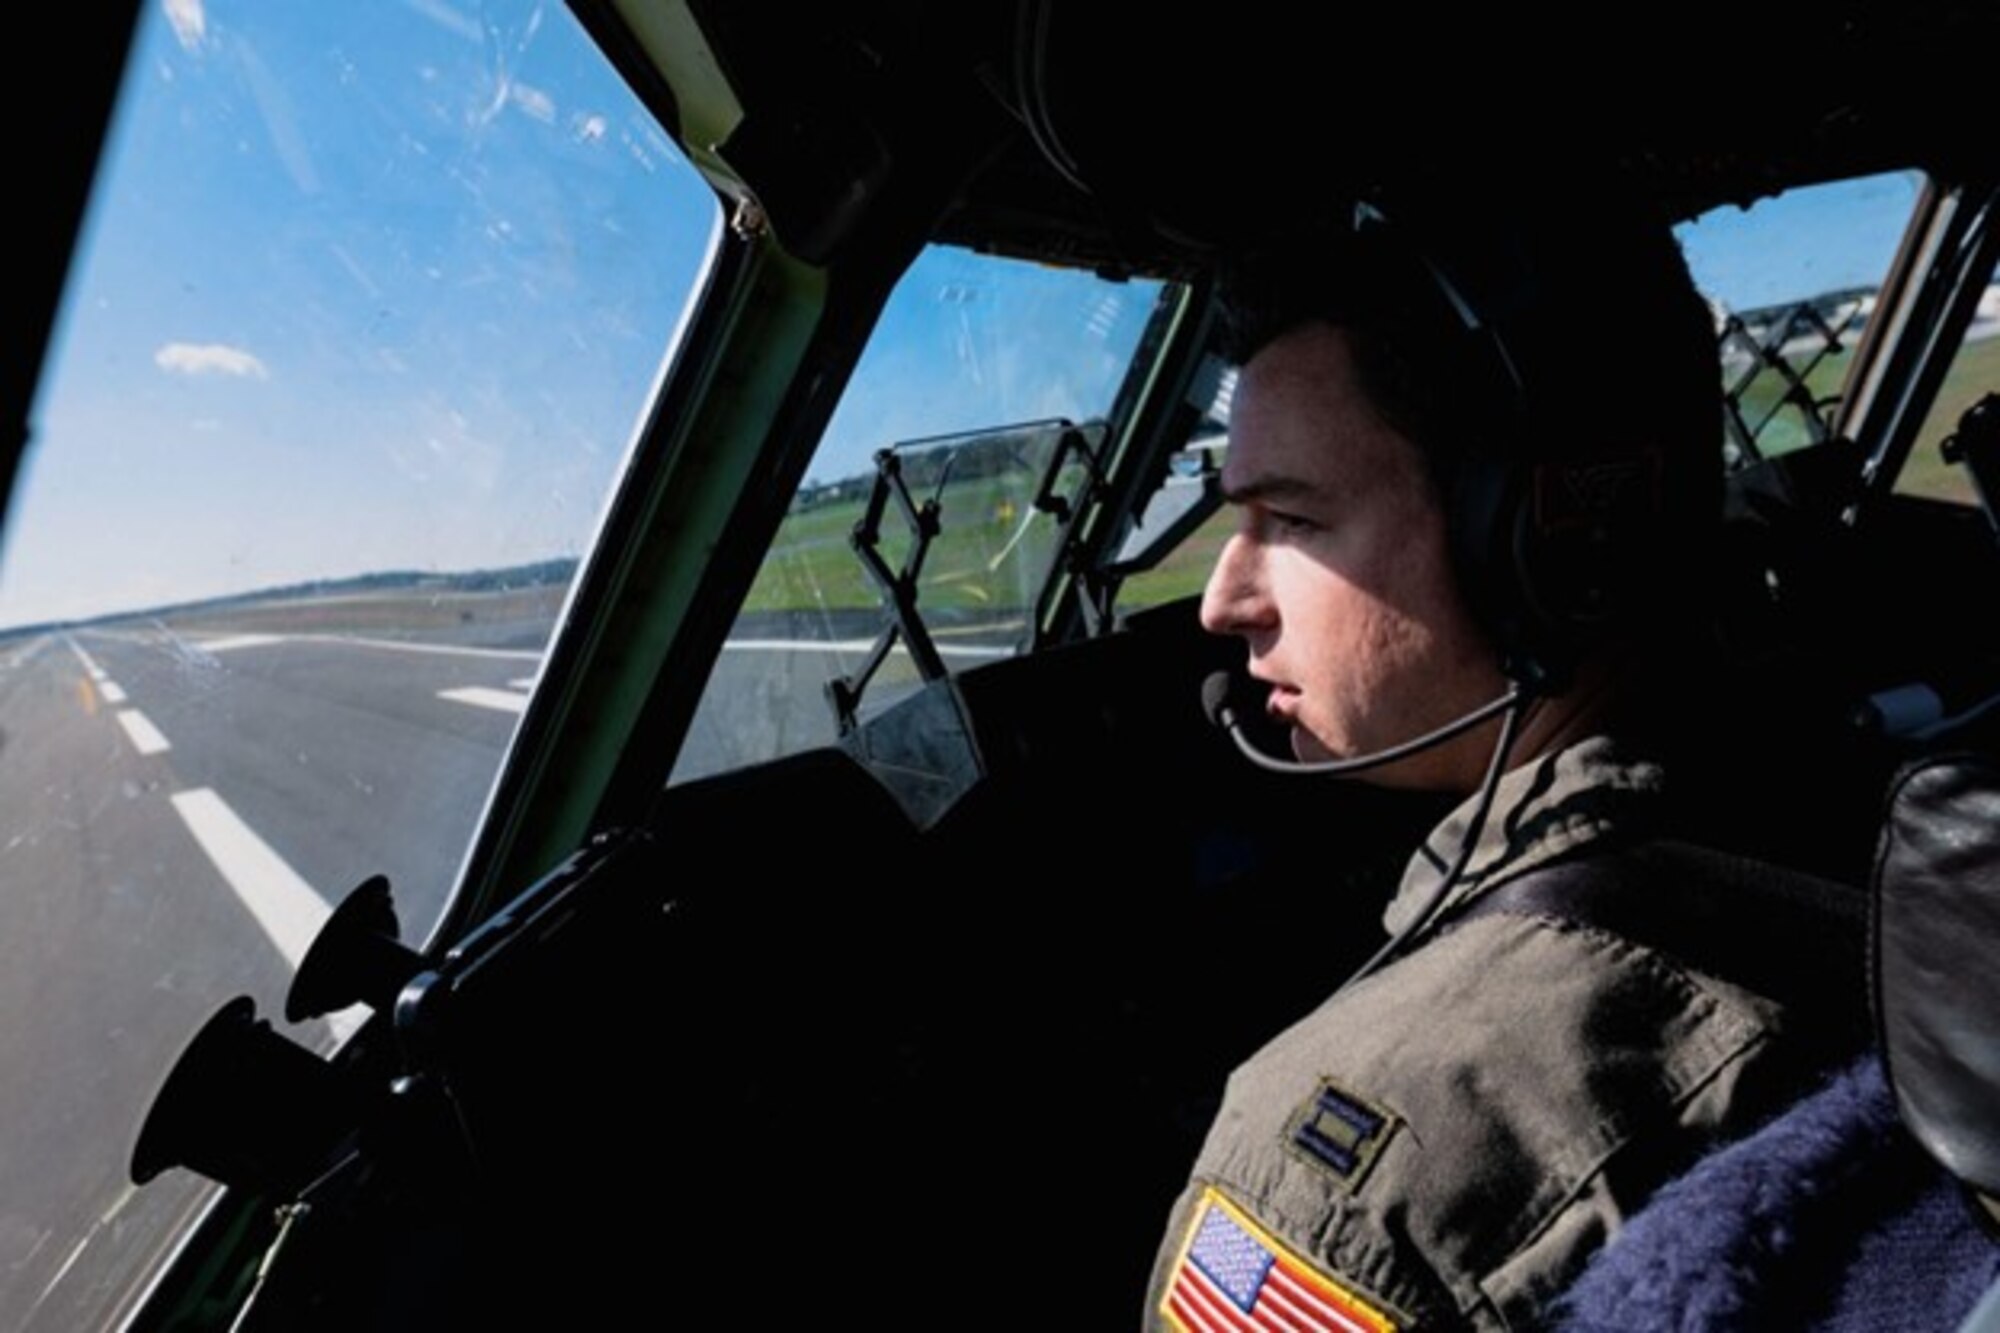 U.S. Air Force Capt. Max Alder, 6th Airlift Squadron C-17 pilot, looks out of the cockpit during takeoff on Joint Base McGuire-Dix-Lakehurst, N.J., Sept. 26, 2022.